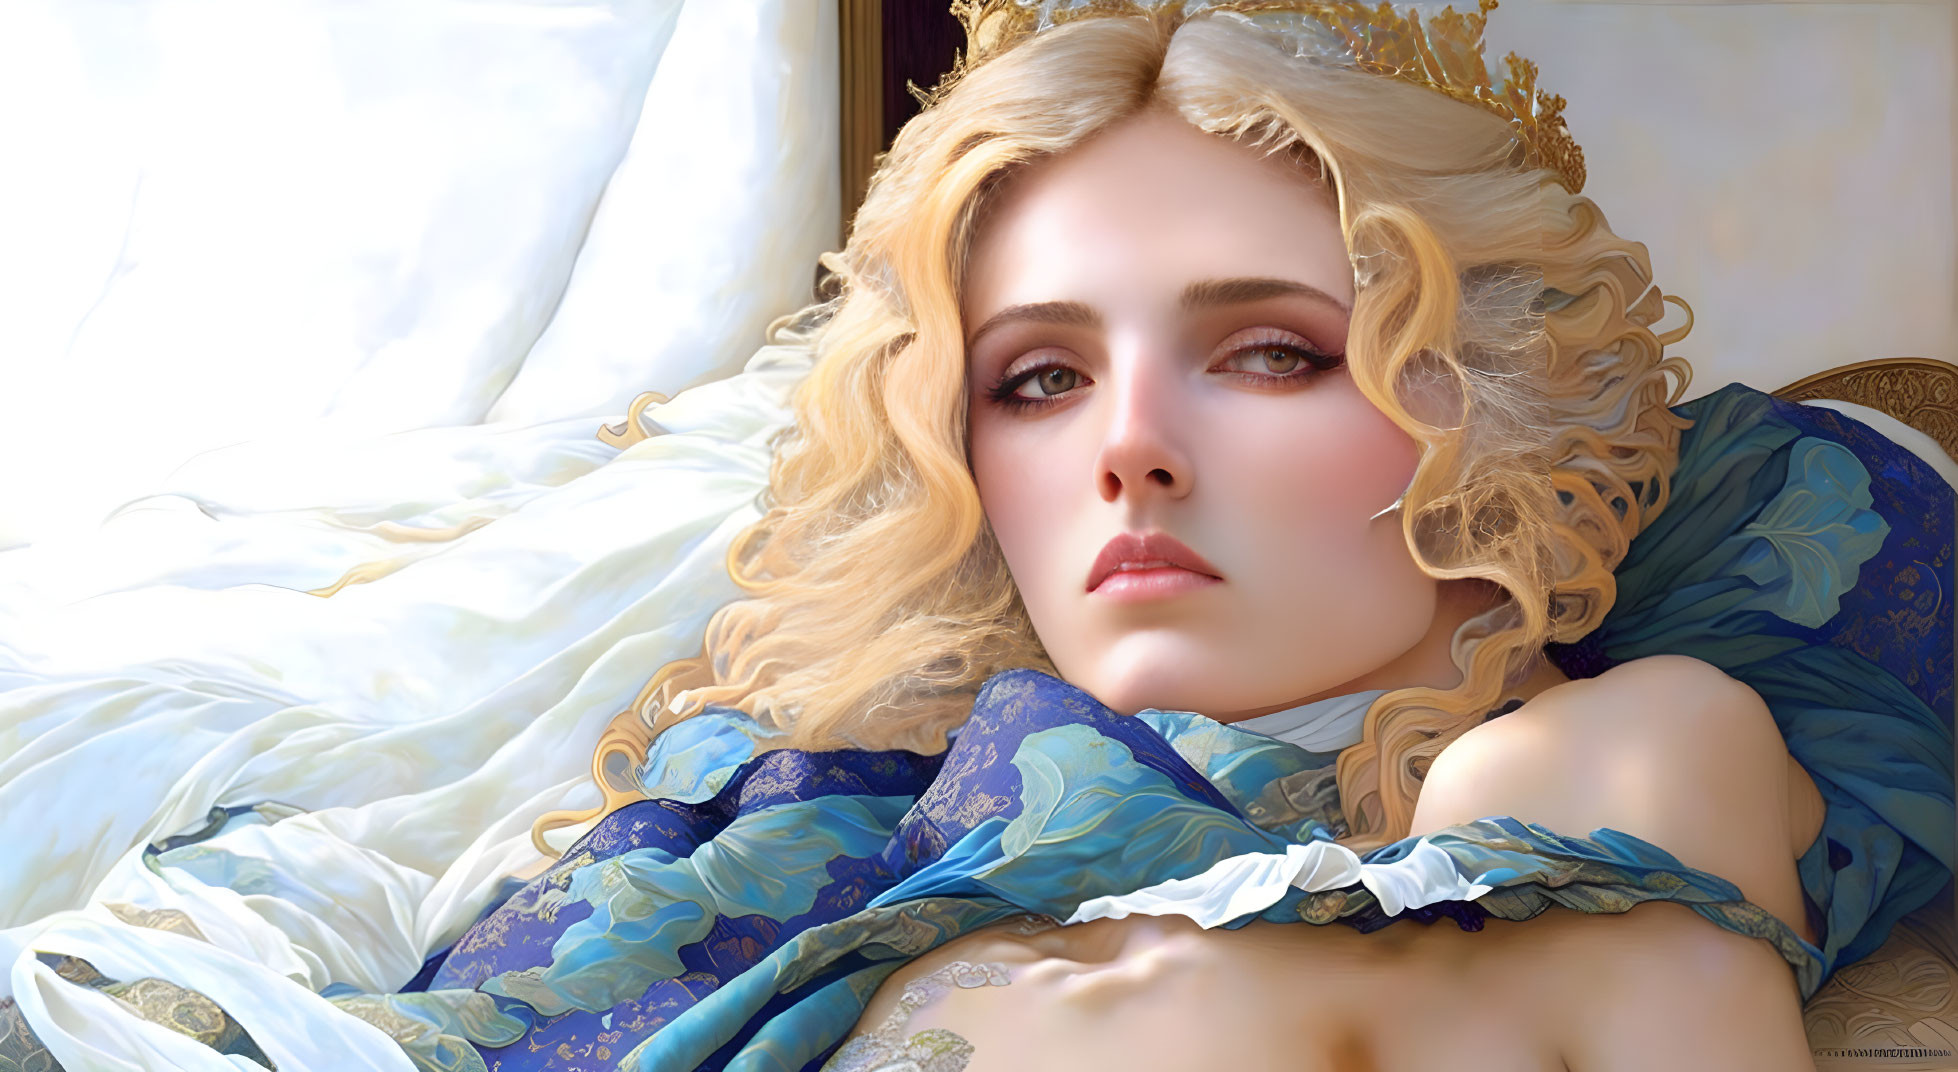 Detailed digital illustration: Woman with blonde, curly hair, golden crown, blue and gold dress, recl